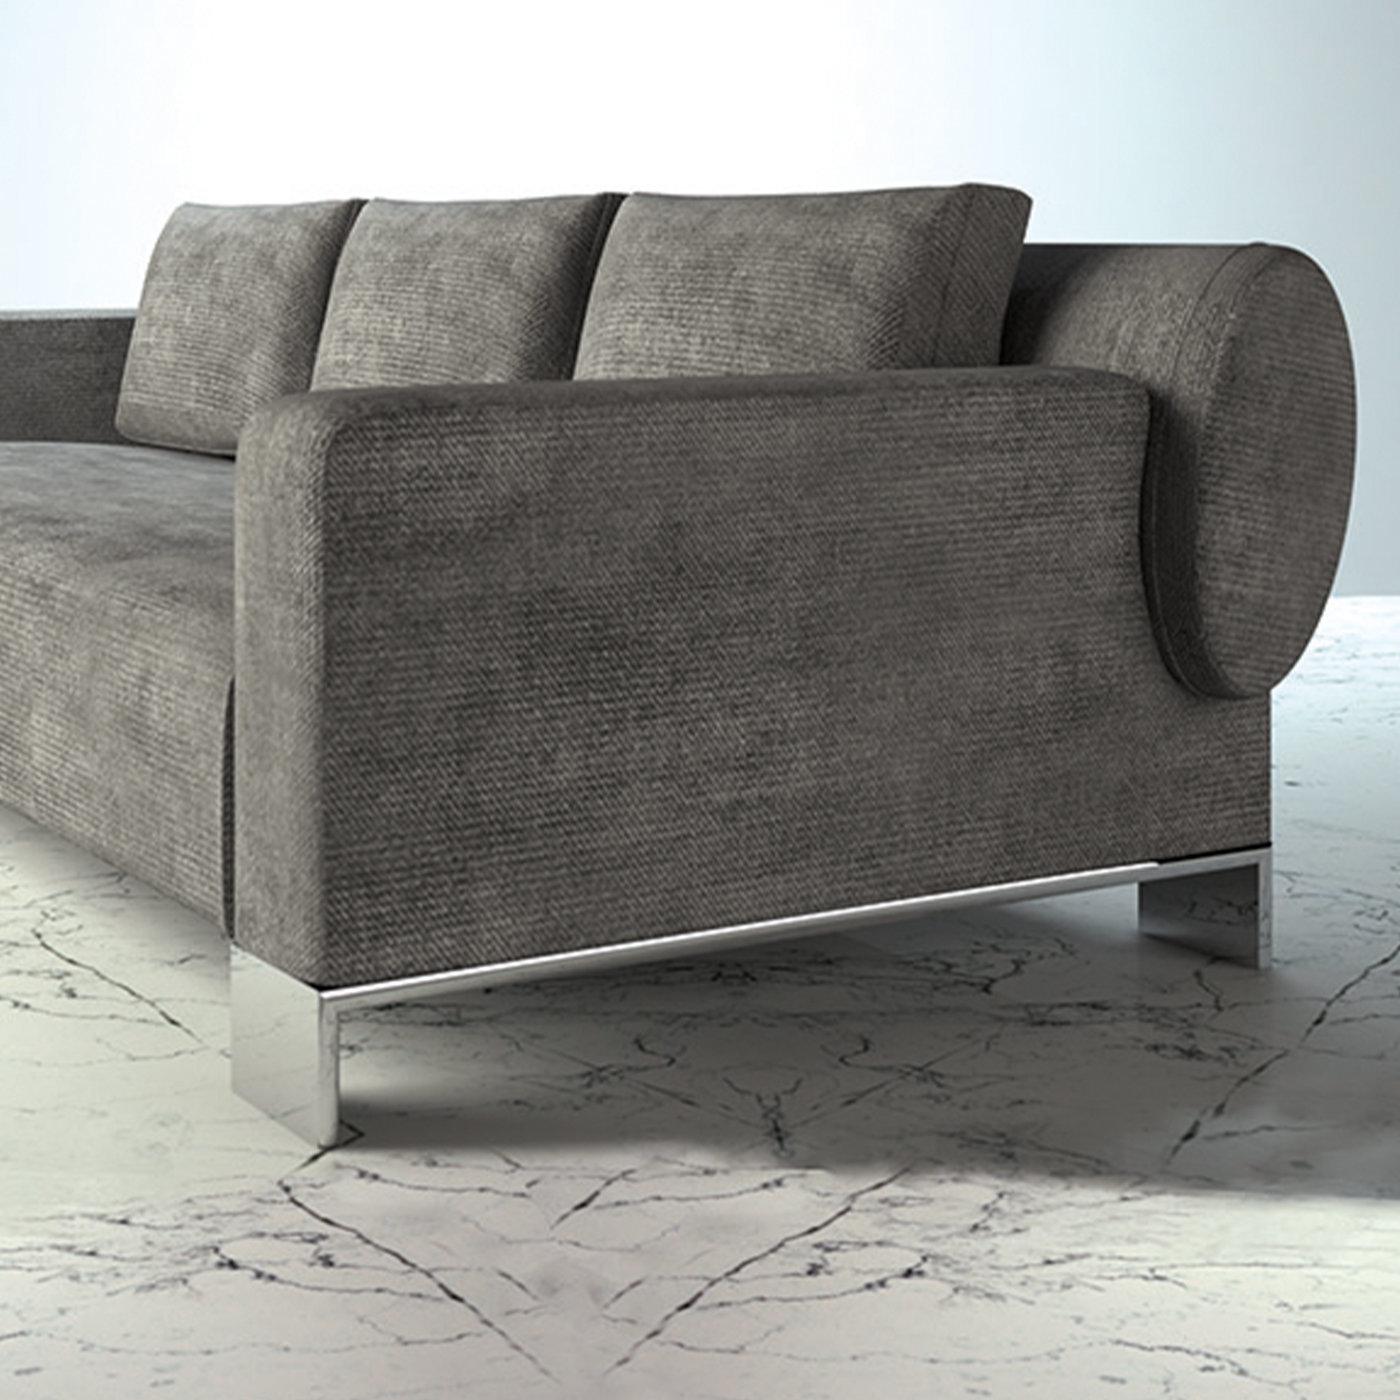 A gorgeous design by Giannella Ventura, this sofa is named after abstract painter Jackson Pollock. In contrast with the namesake artist's expressive lines, it is defined by clean and minimalist geometric shapes entirely upholstered with a timeless